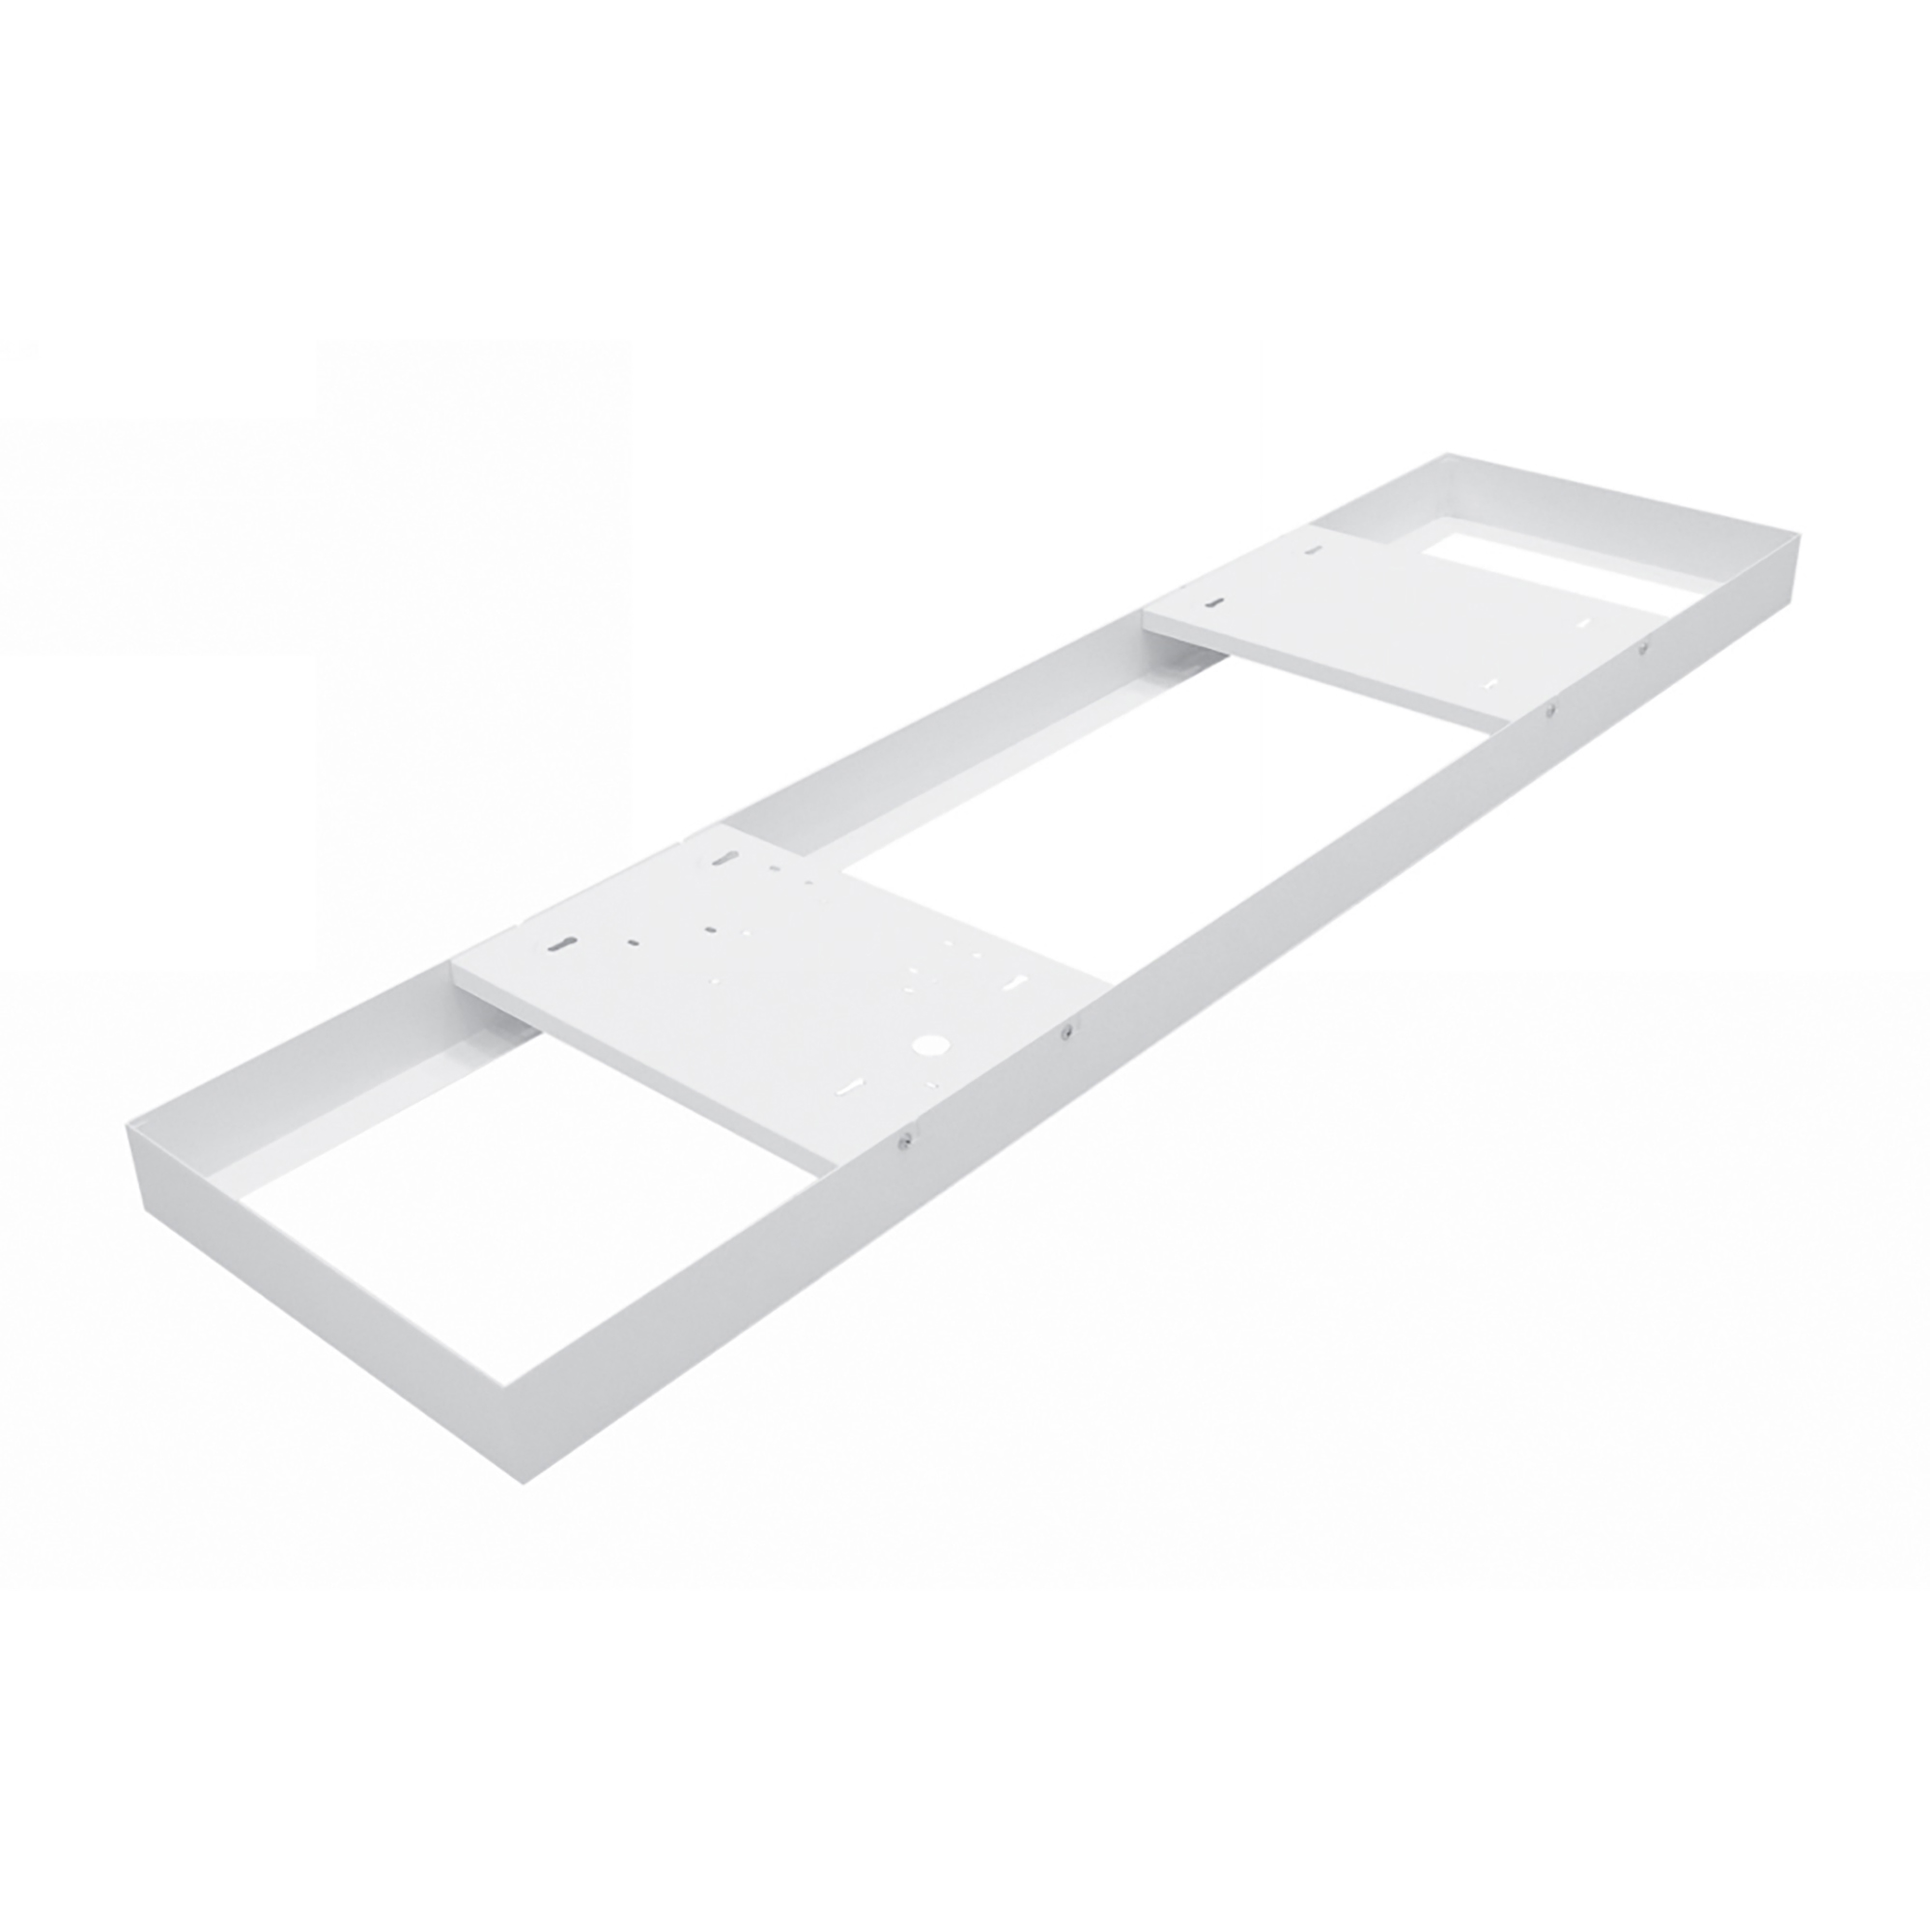 DA240007/TW  Piano 123 Surface Mounting Frame In Textured White For Panel 1195x295mm, 5yrs Warranty